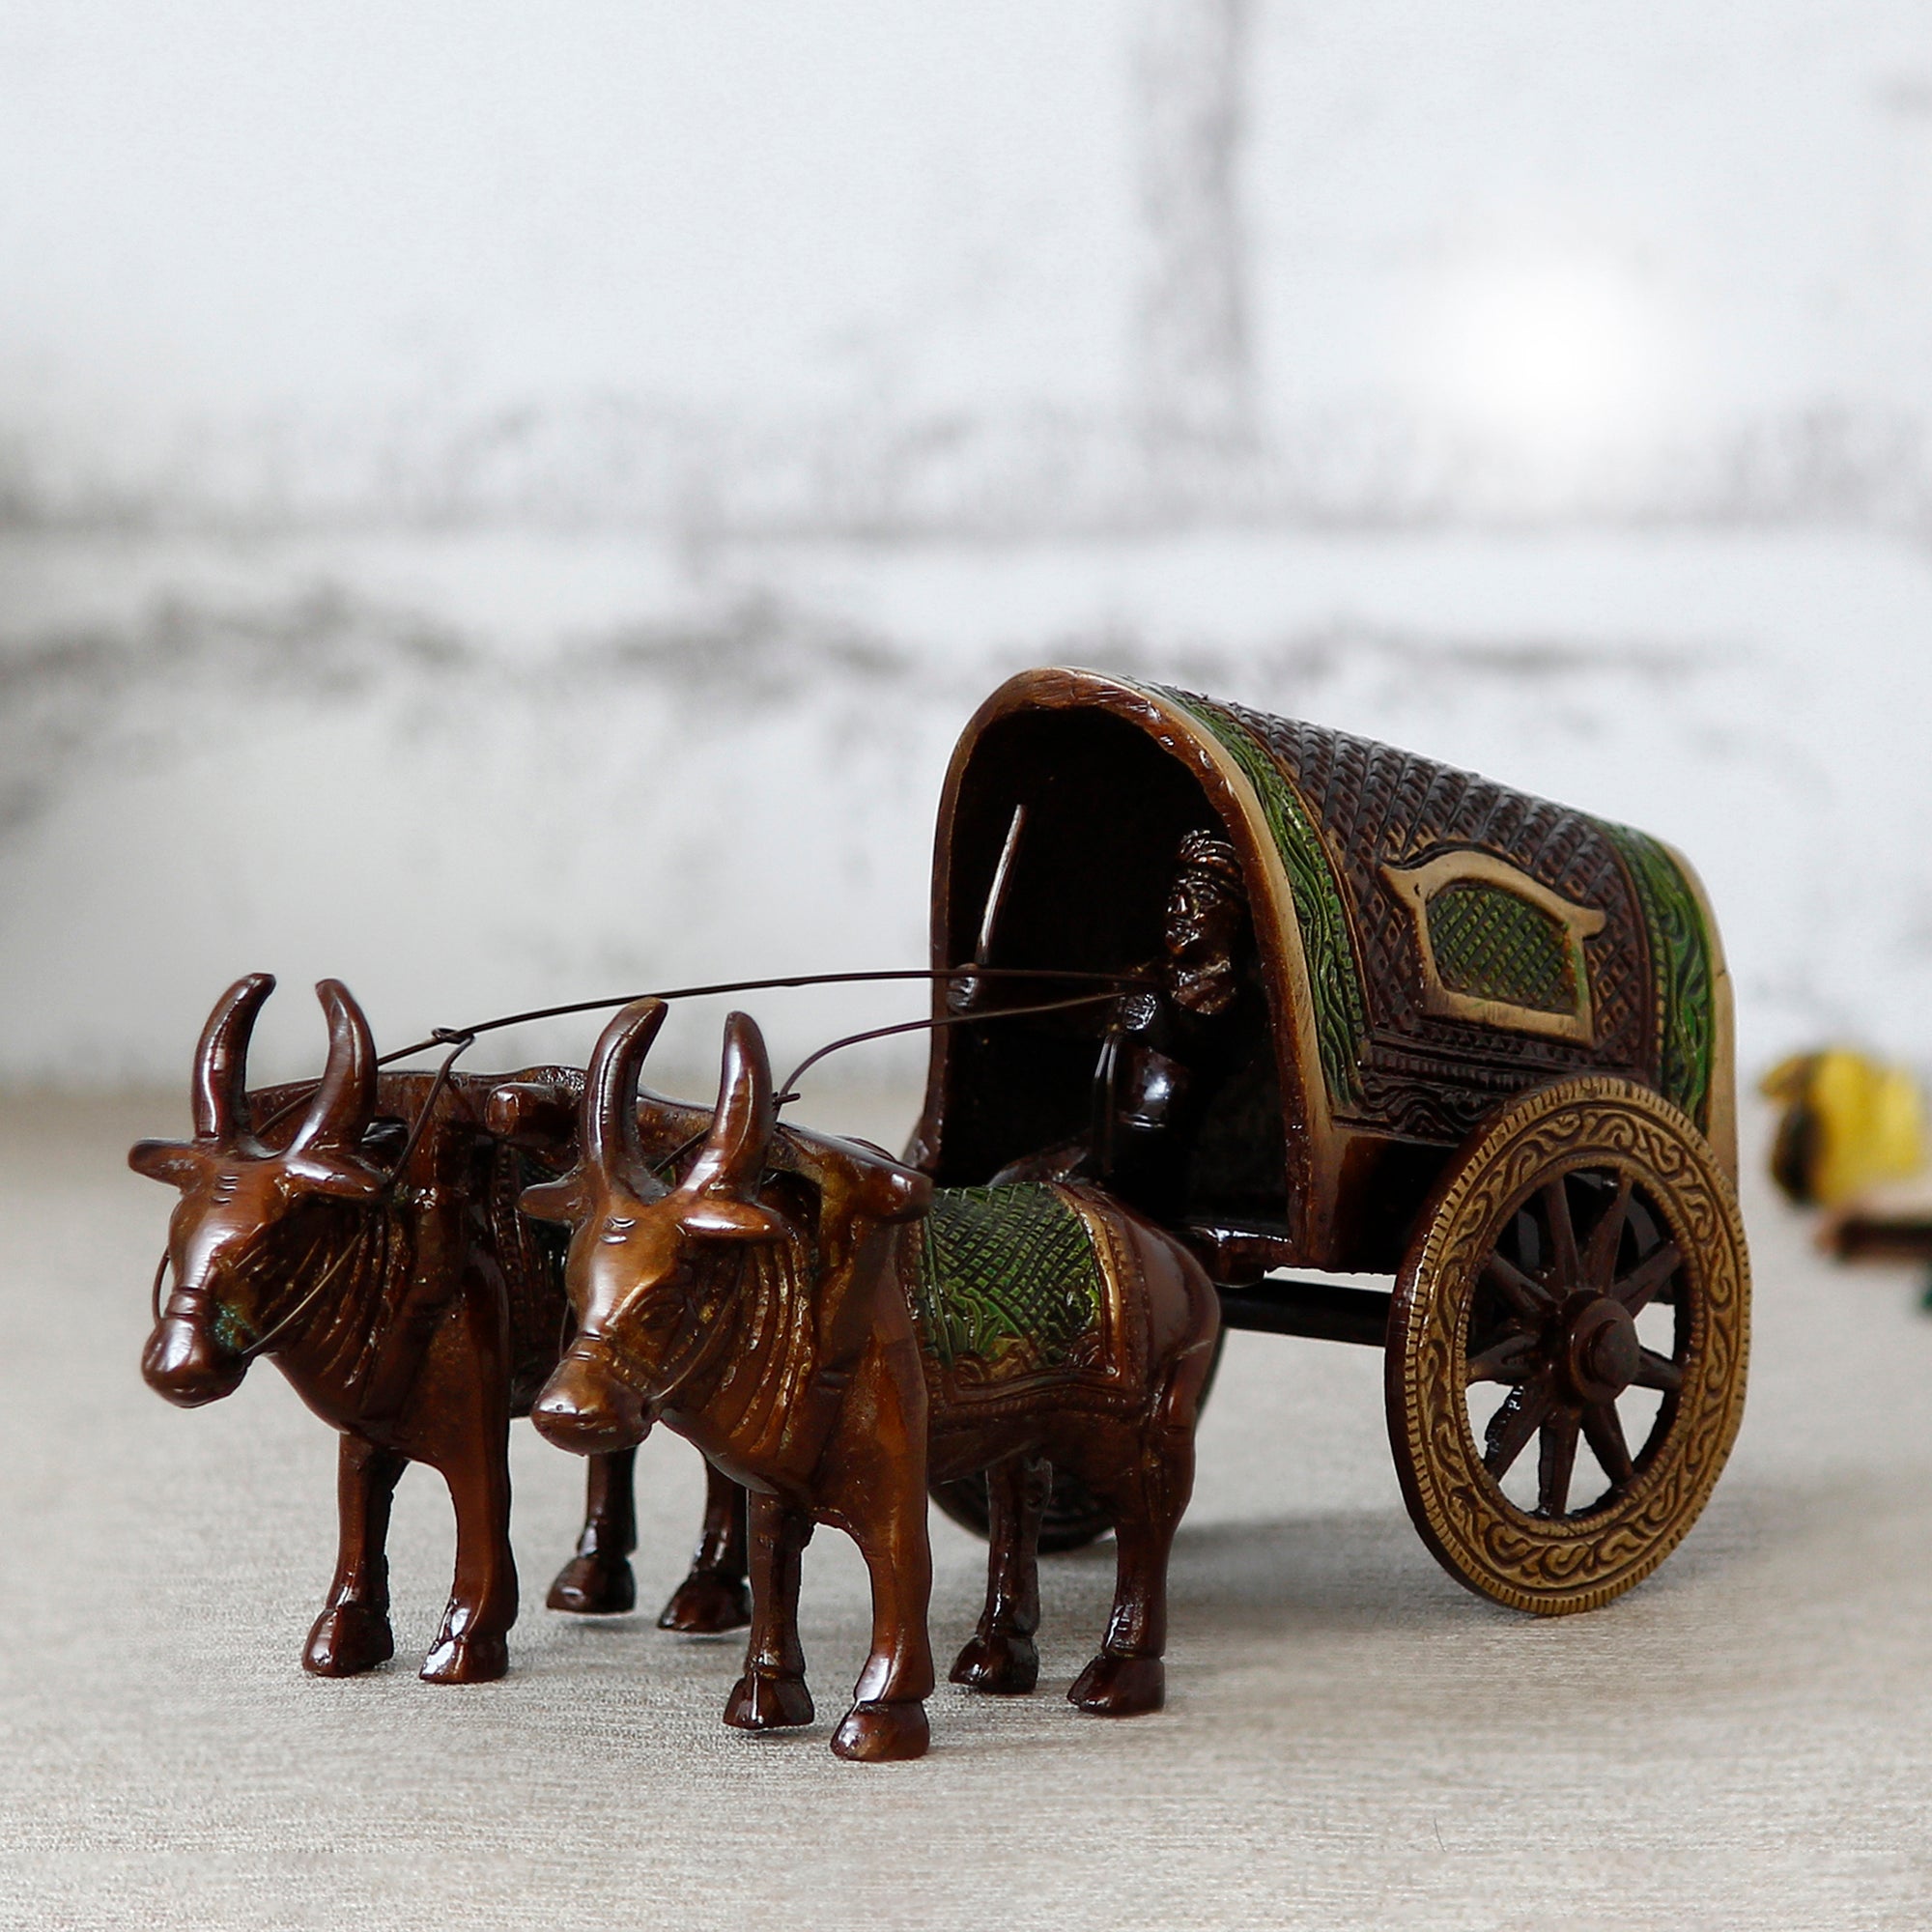 Designer Pearl Rakhi with Brass Brown and Green Antique Finish Closed Bullock Cart  and Roli Chawal Pack, Best Wishes Greeting Card 2